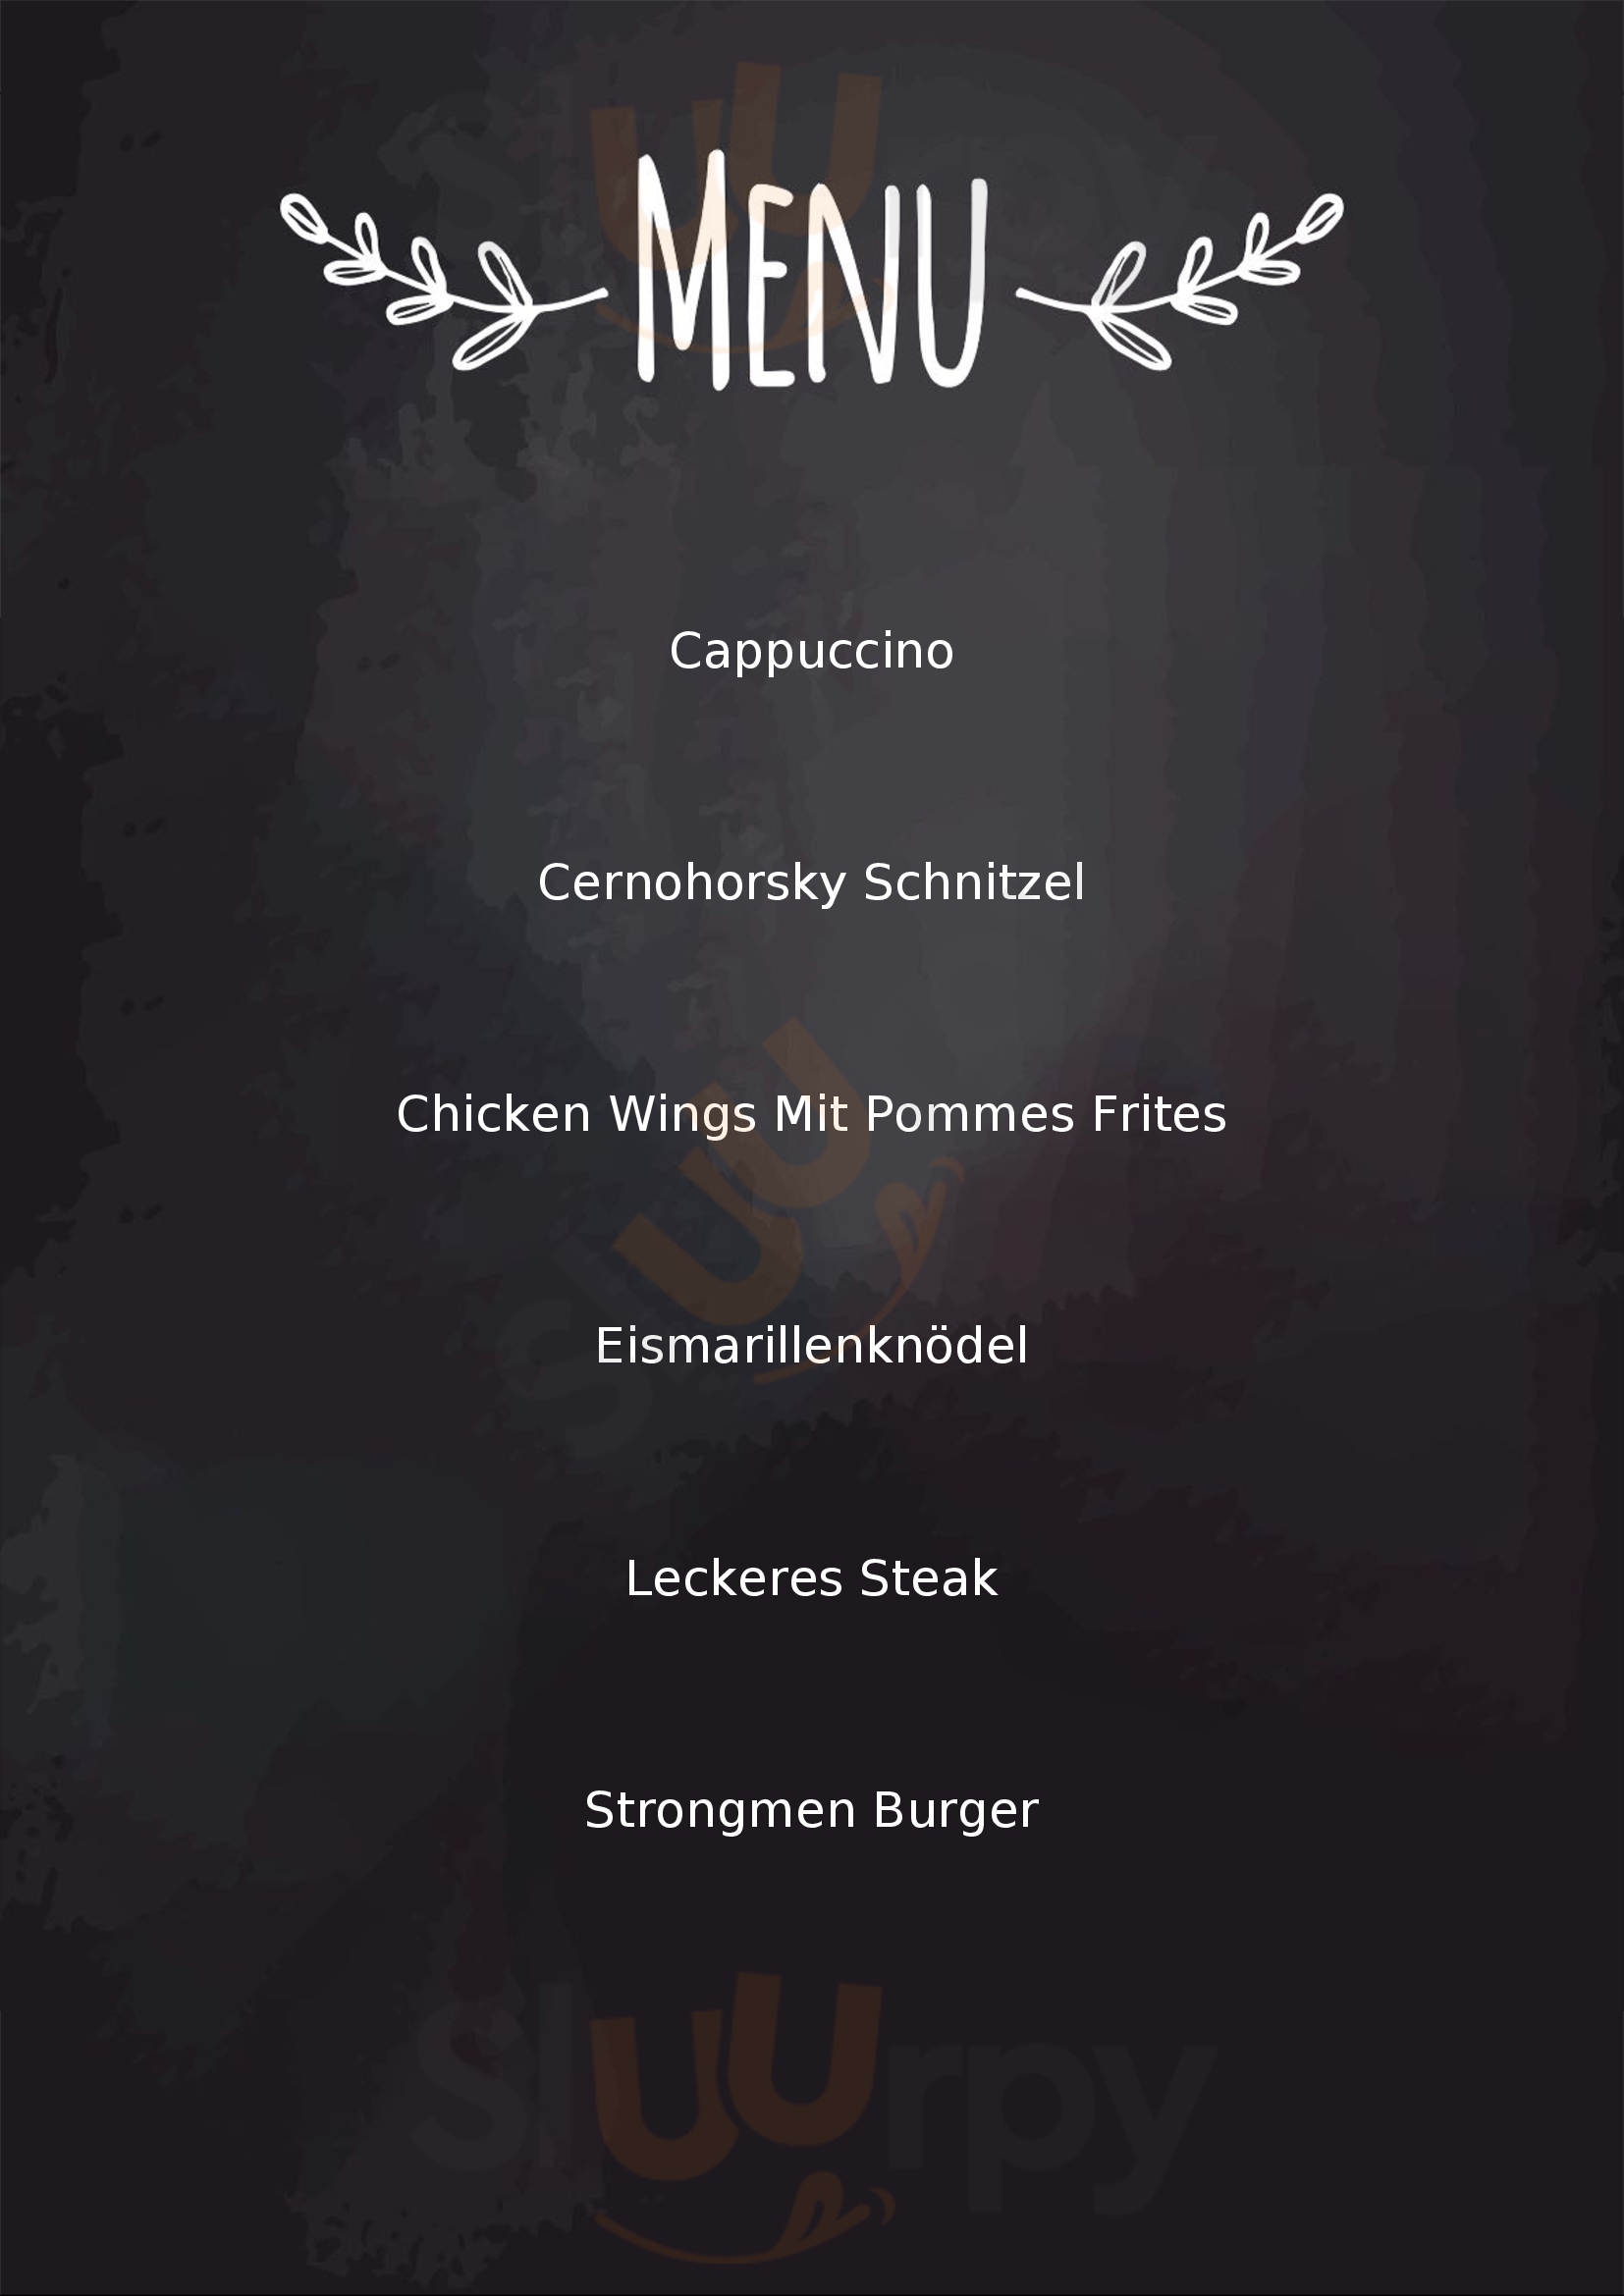 Cafe Zentral Neusiedl am See Menu - 1